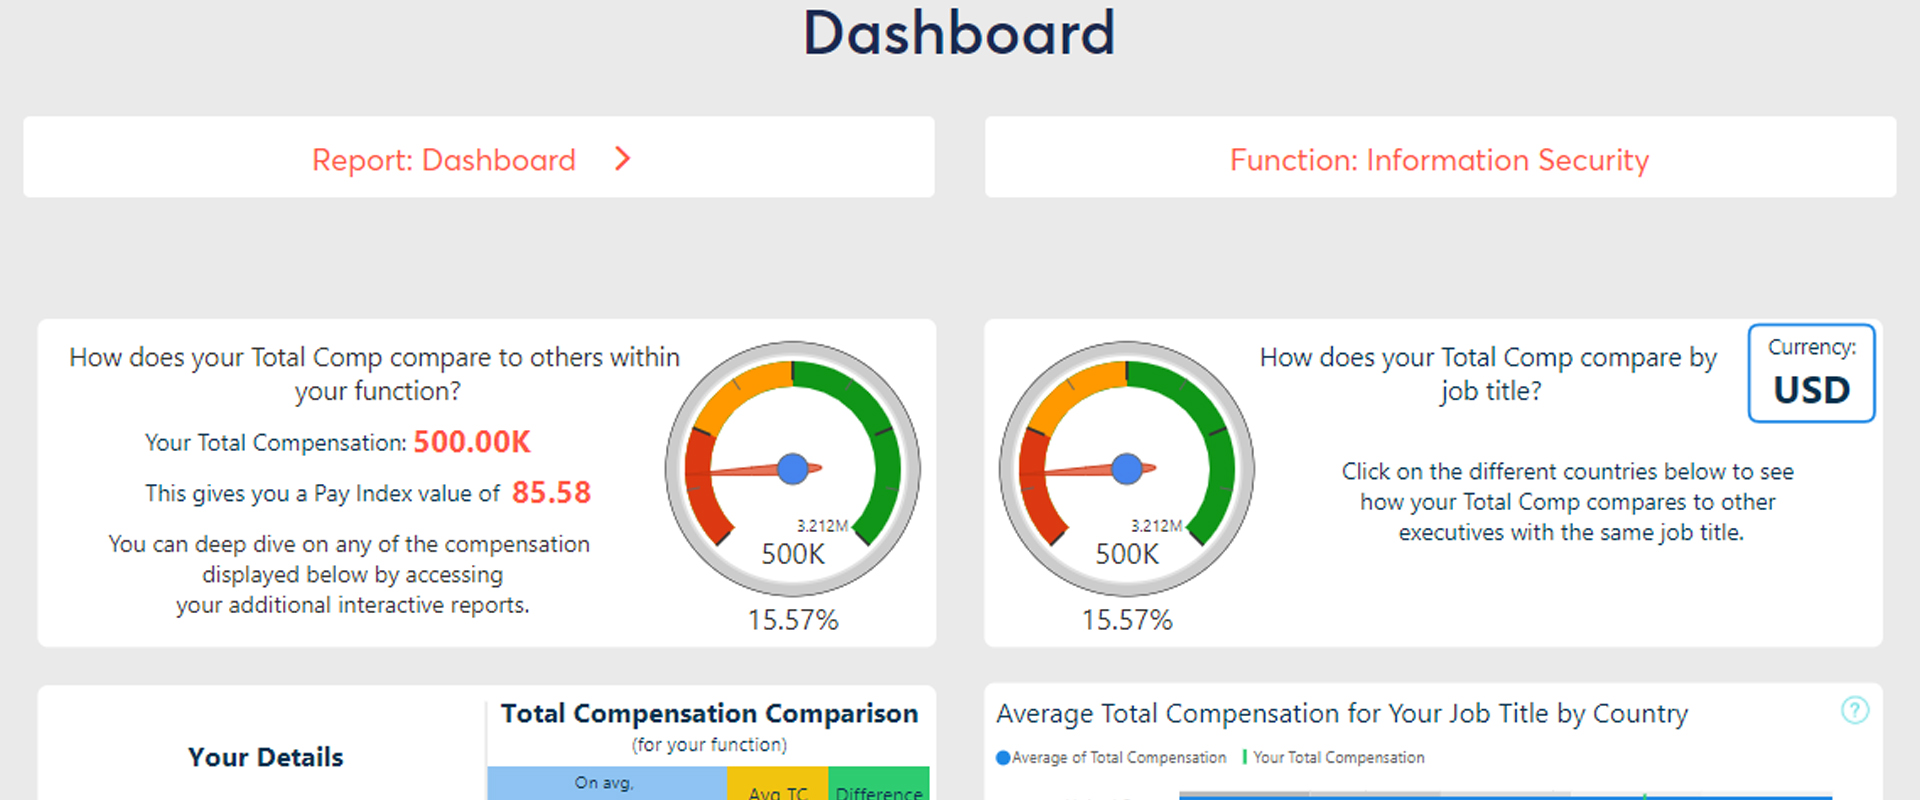 NEW Individual Dashboard Release